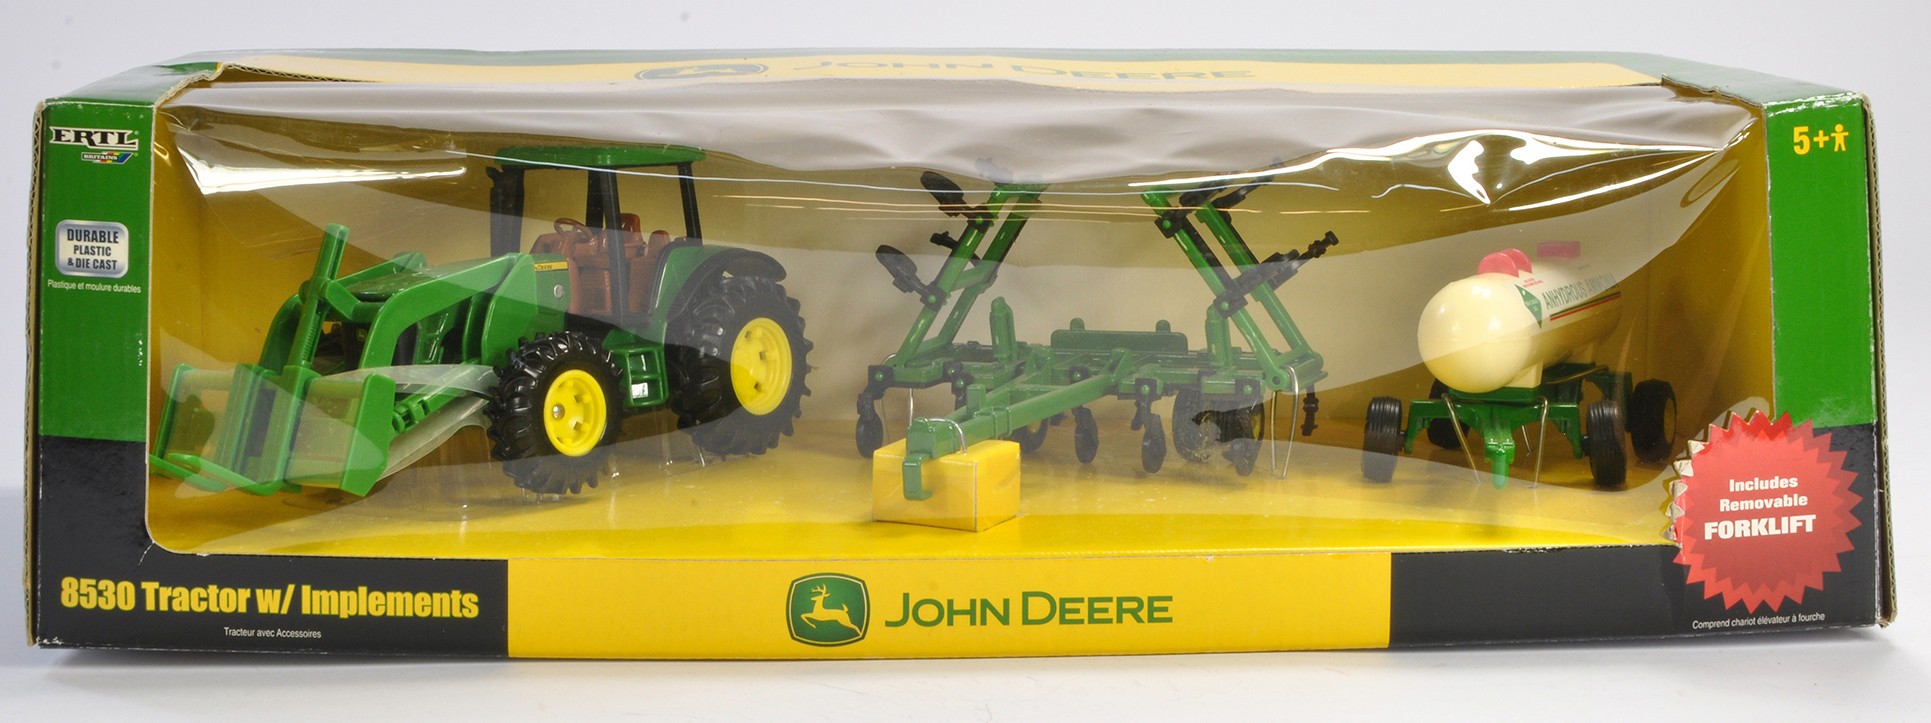 Ertl (2006) 1/32 Farm Model Issue comprising No. 15814 John Deere 8530 Tractor with implements (